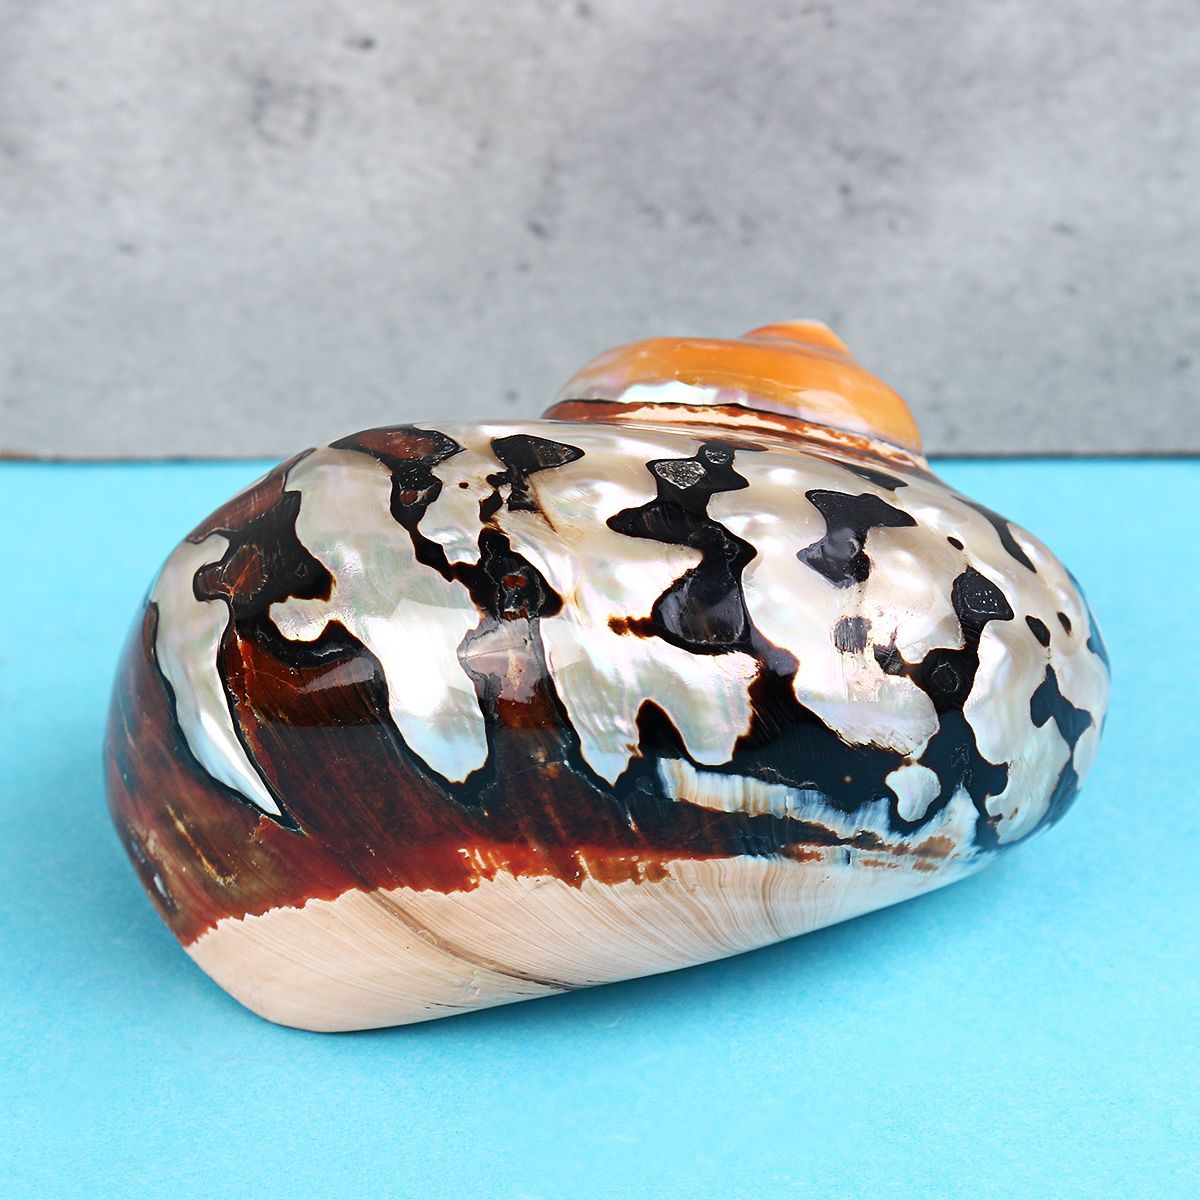 6-95cm-Natural-African-Turban-Sea-Shell-Coral-Conch-Snail-Home-Fish-Tank-Decorations-1537994